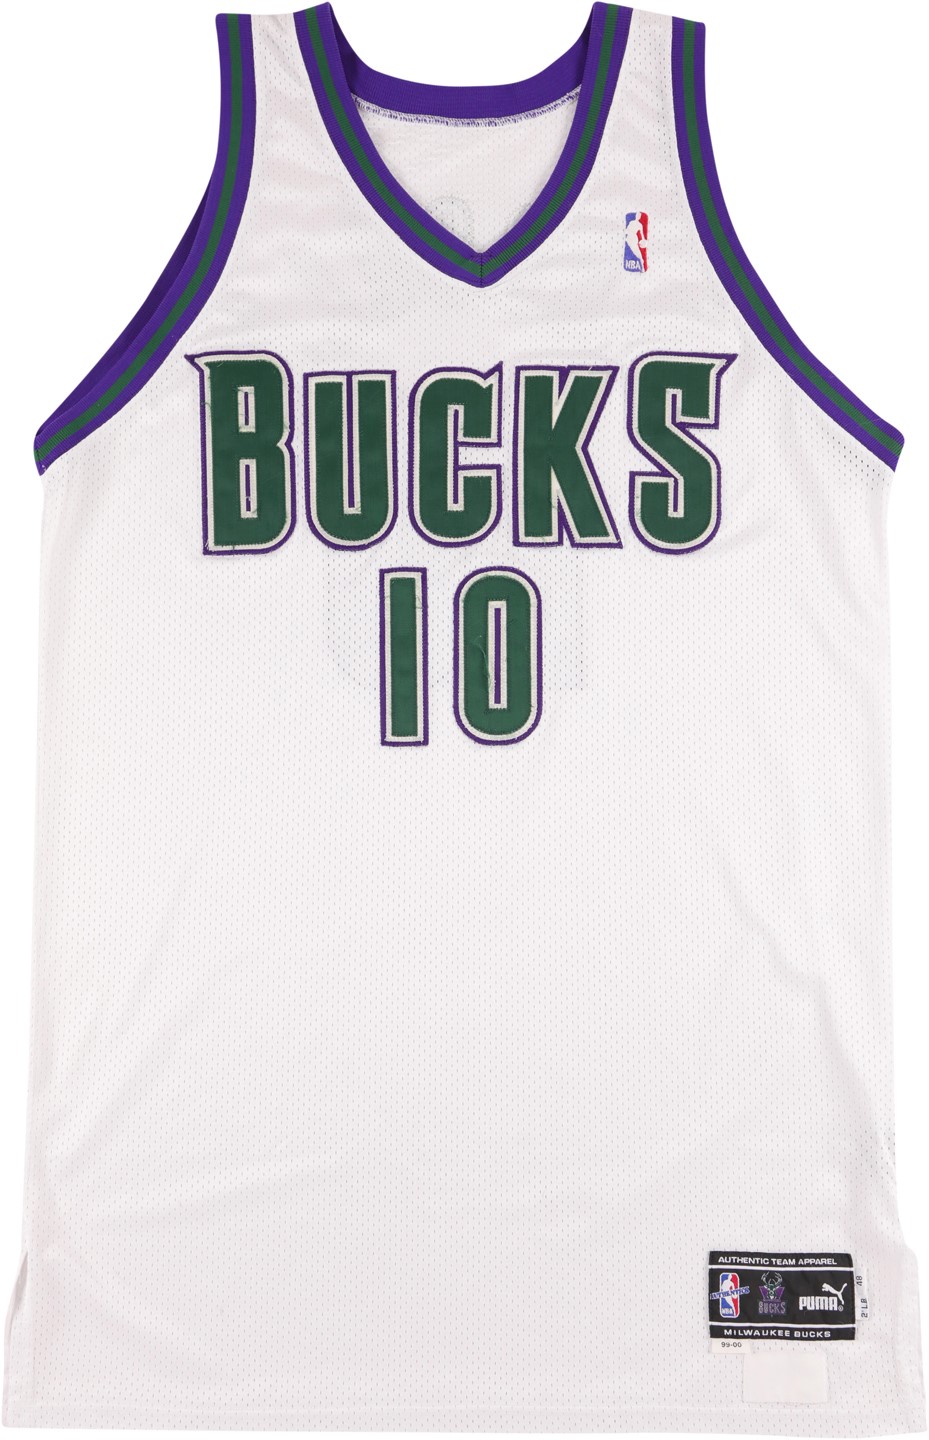 1999-2000 Sam Cassell Milwaukee Bucks Game Worn Jersey (Photo-Matched to Multiple Games)